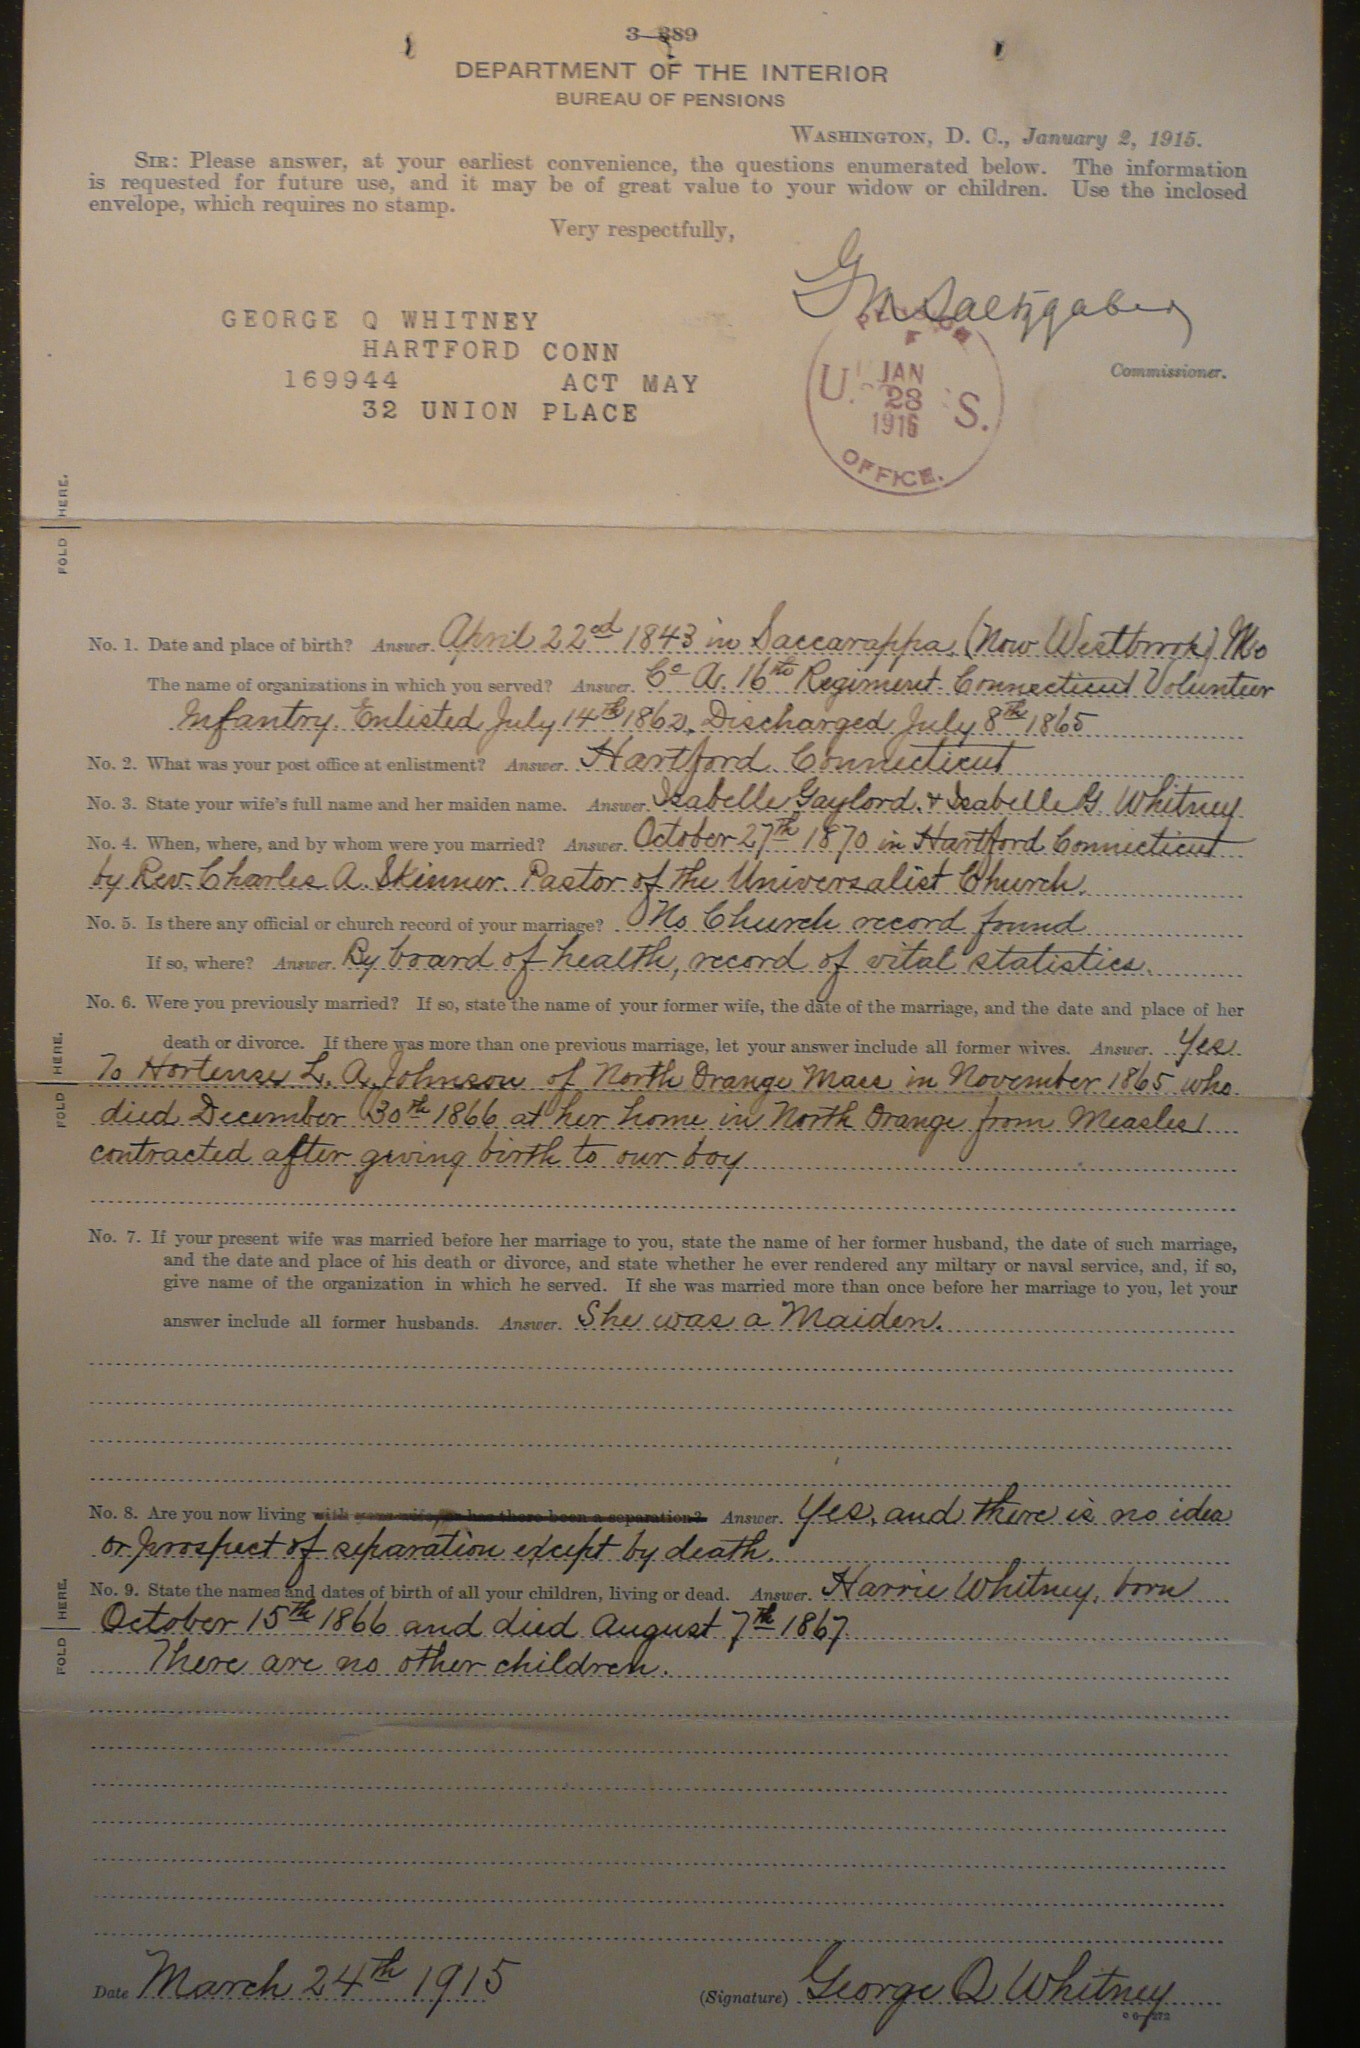 Reply to Inquiry, 1915